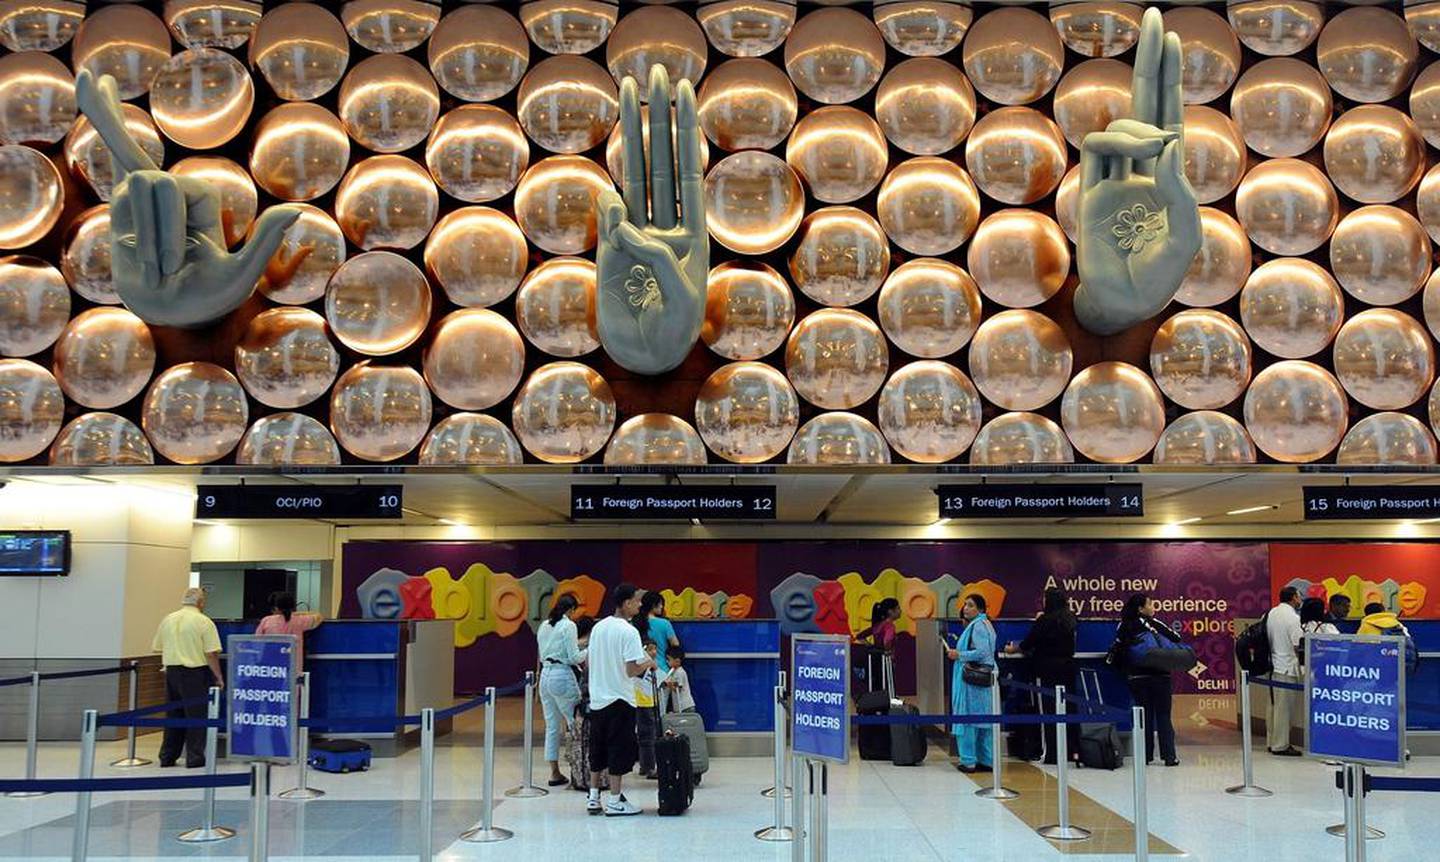 Passengers pass through immigration counters at Terminal 3 of Indira Gandhi International Airport in New Delhi. AFP